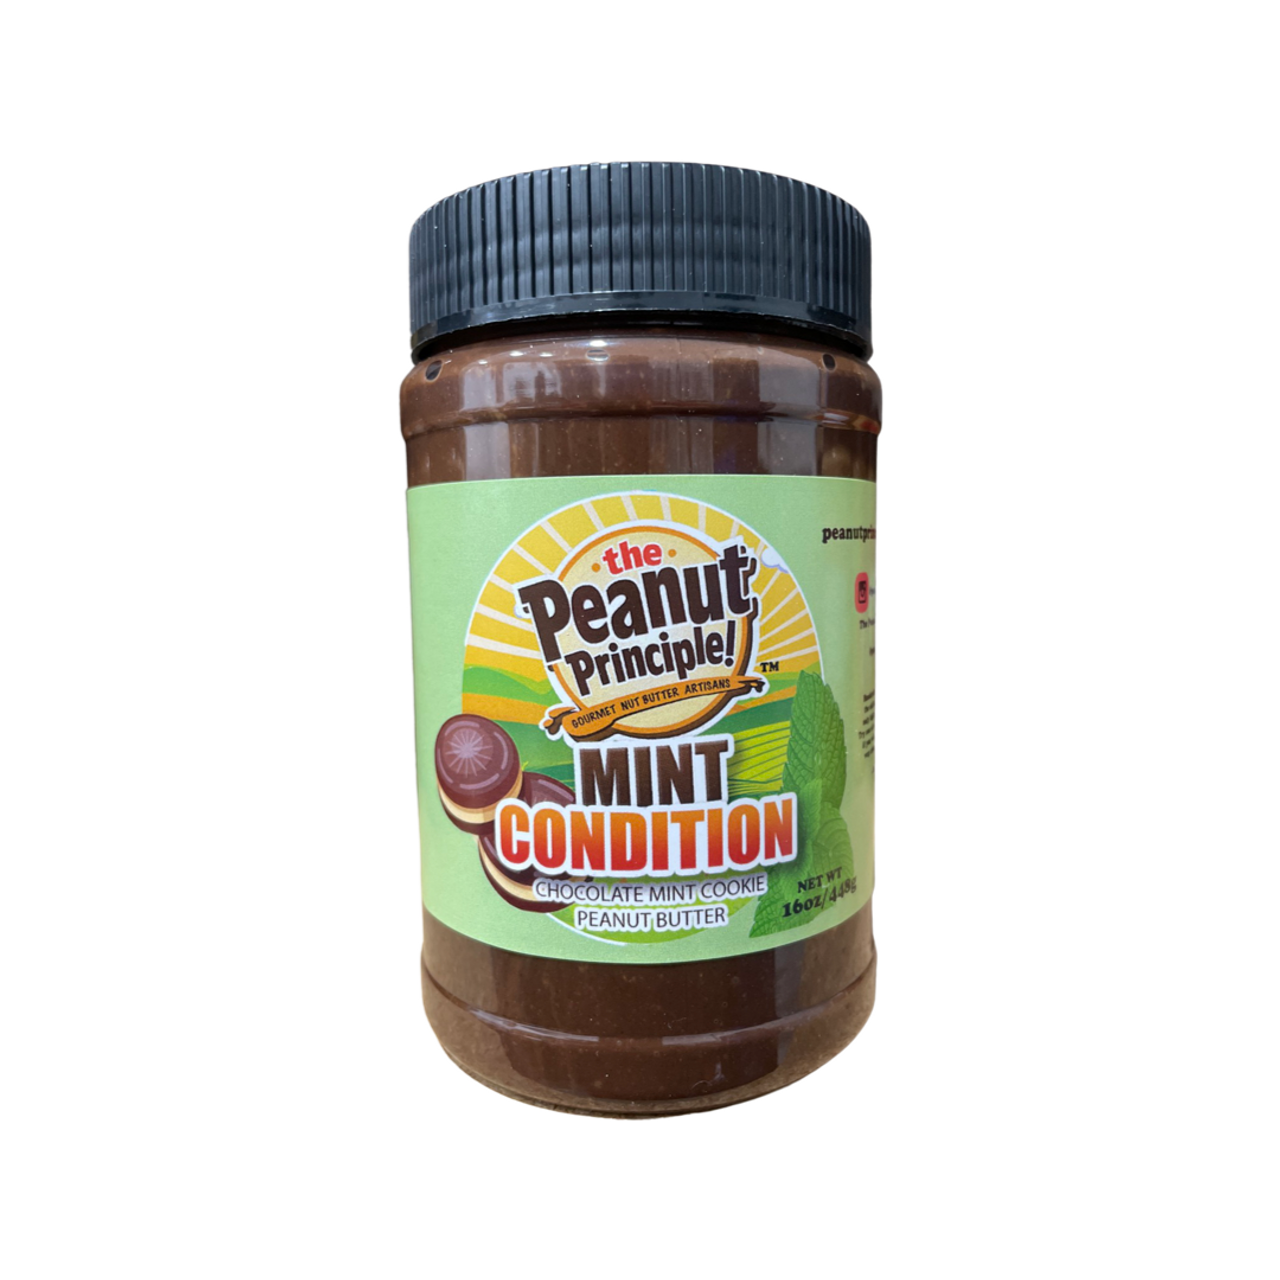 Mint Chocolate Smoothie - Peanut Butter and Jilly